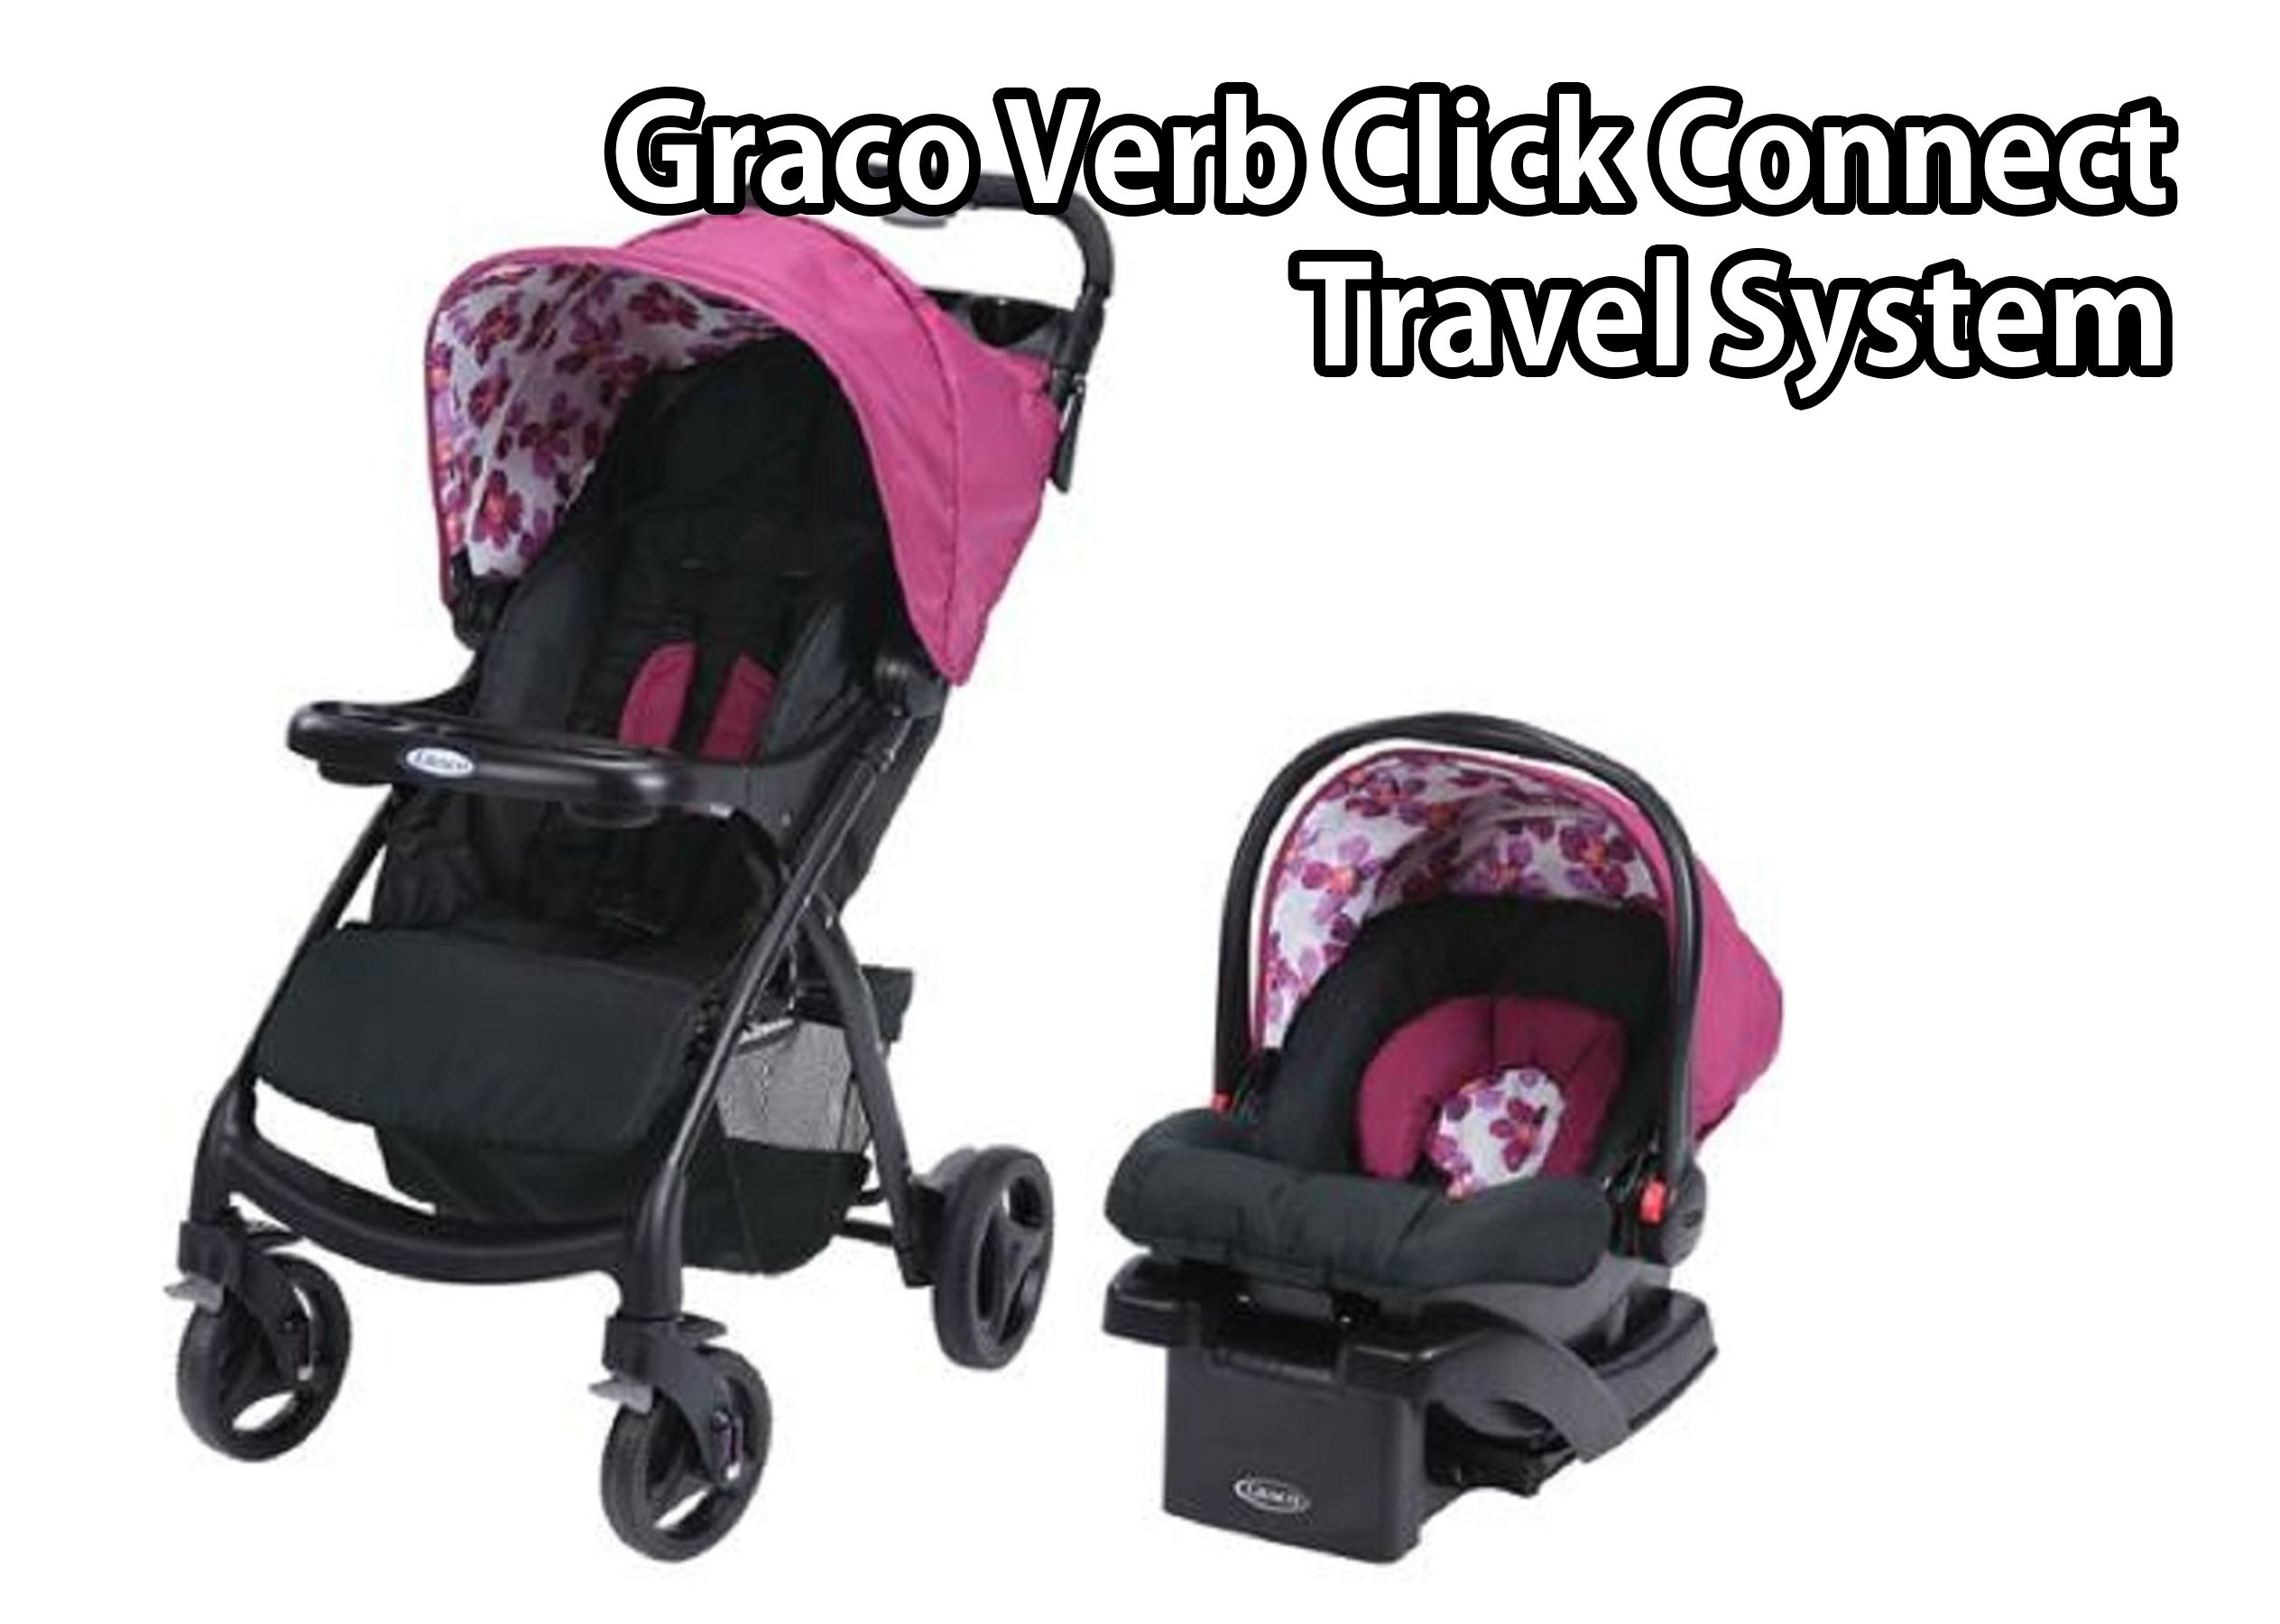 system travel graco verb click connect